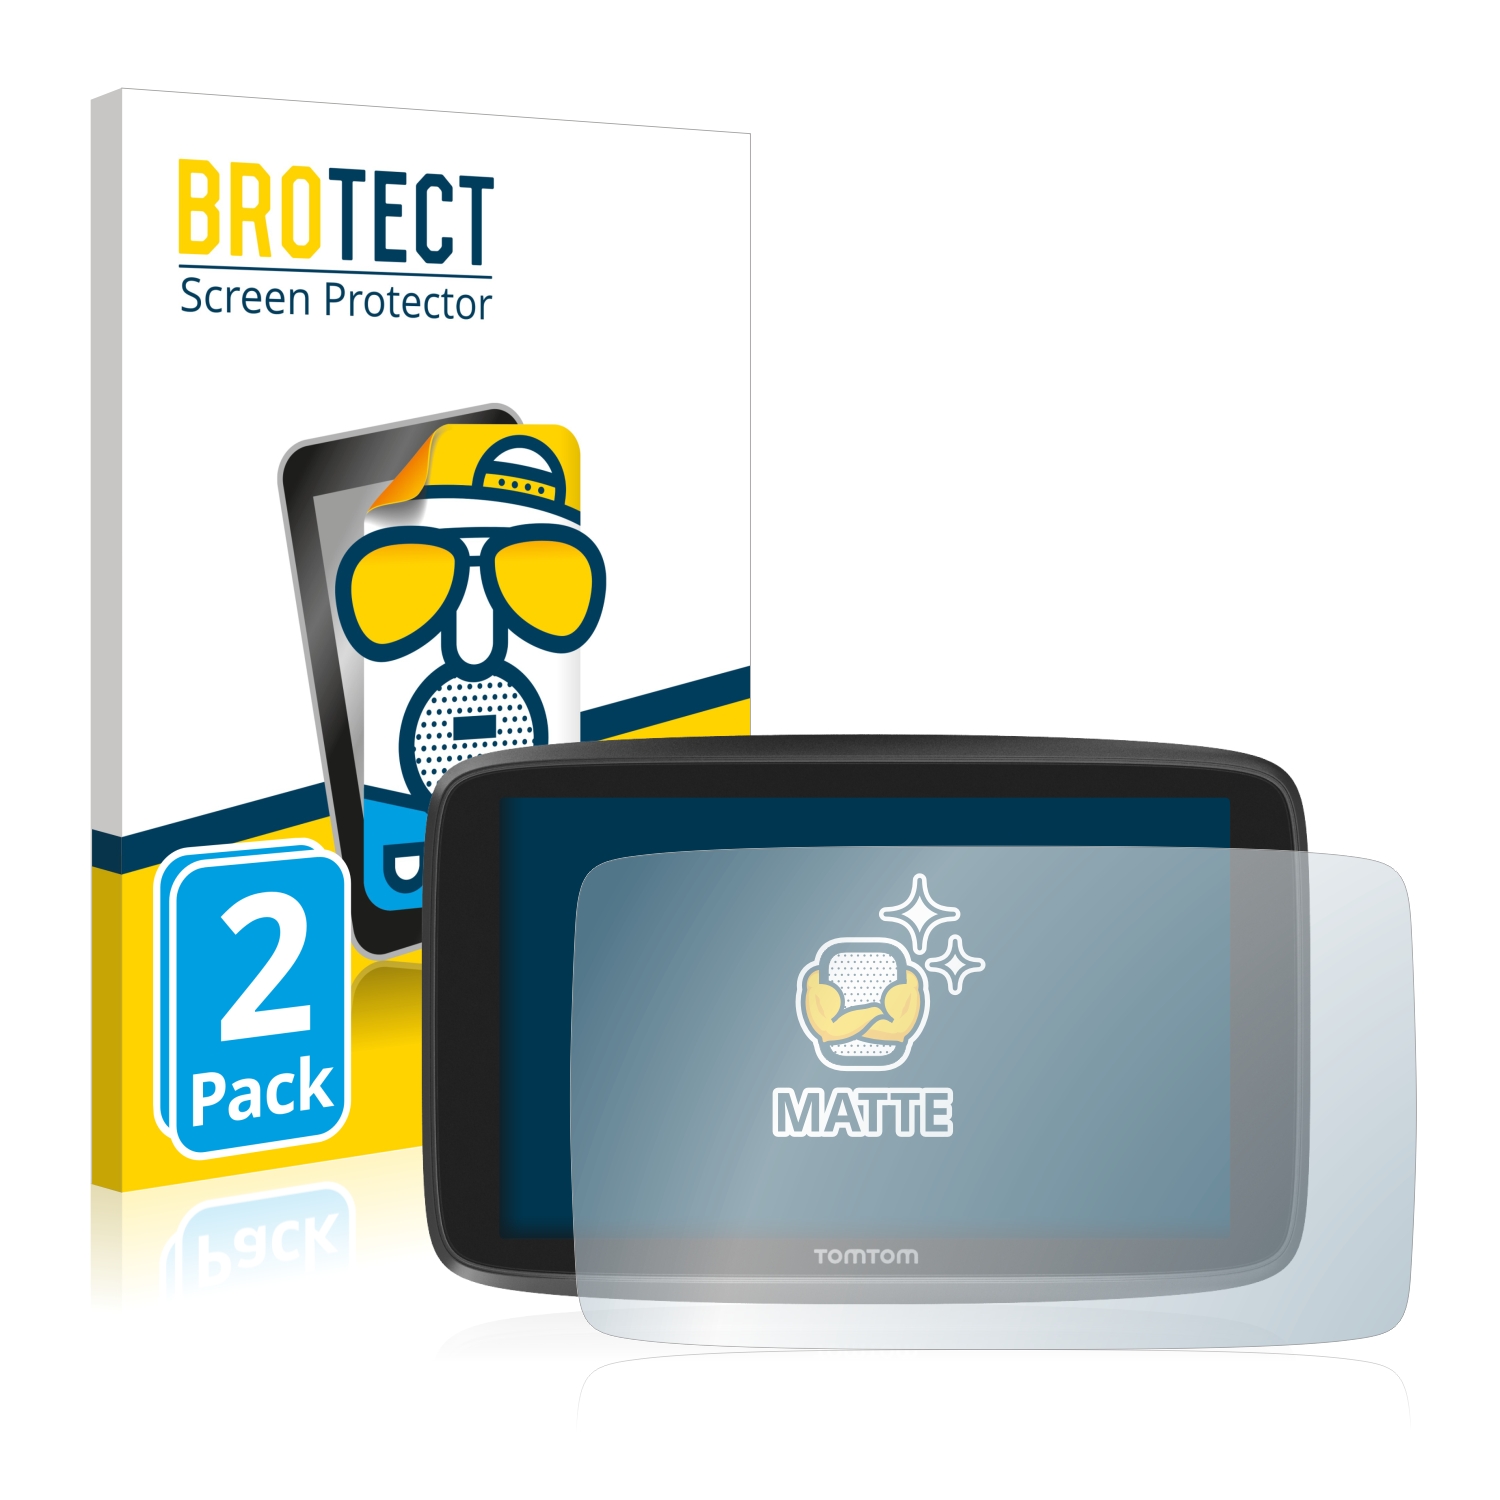 2x BROTECT Matte Screen Protector for GO Camper | protectionfilms24.com